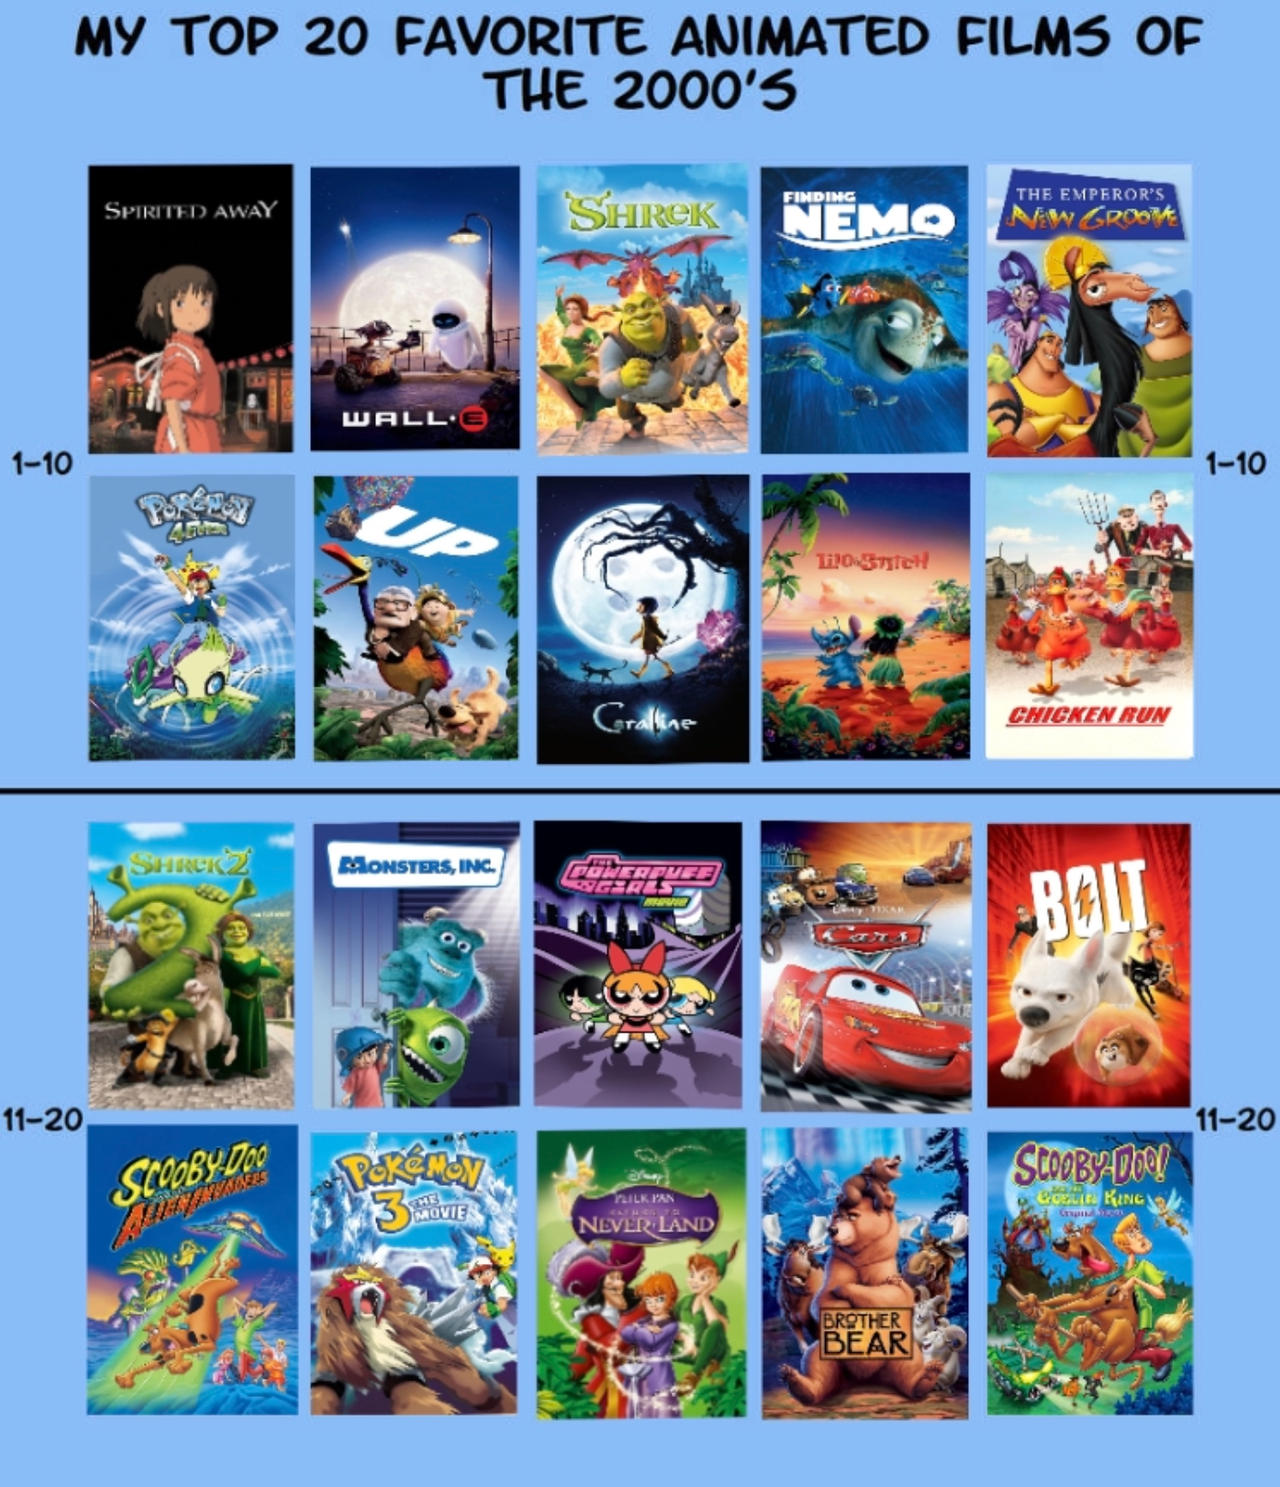 Top 20 animated films of the 2000s by jallroynoy on DeviantArt